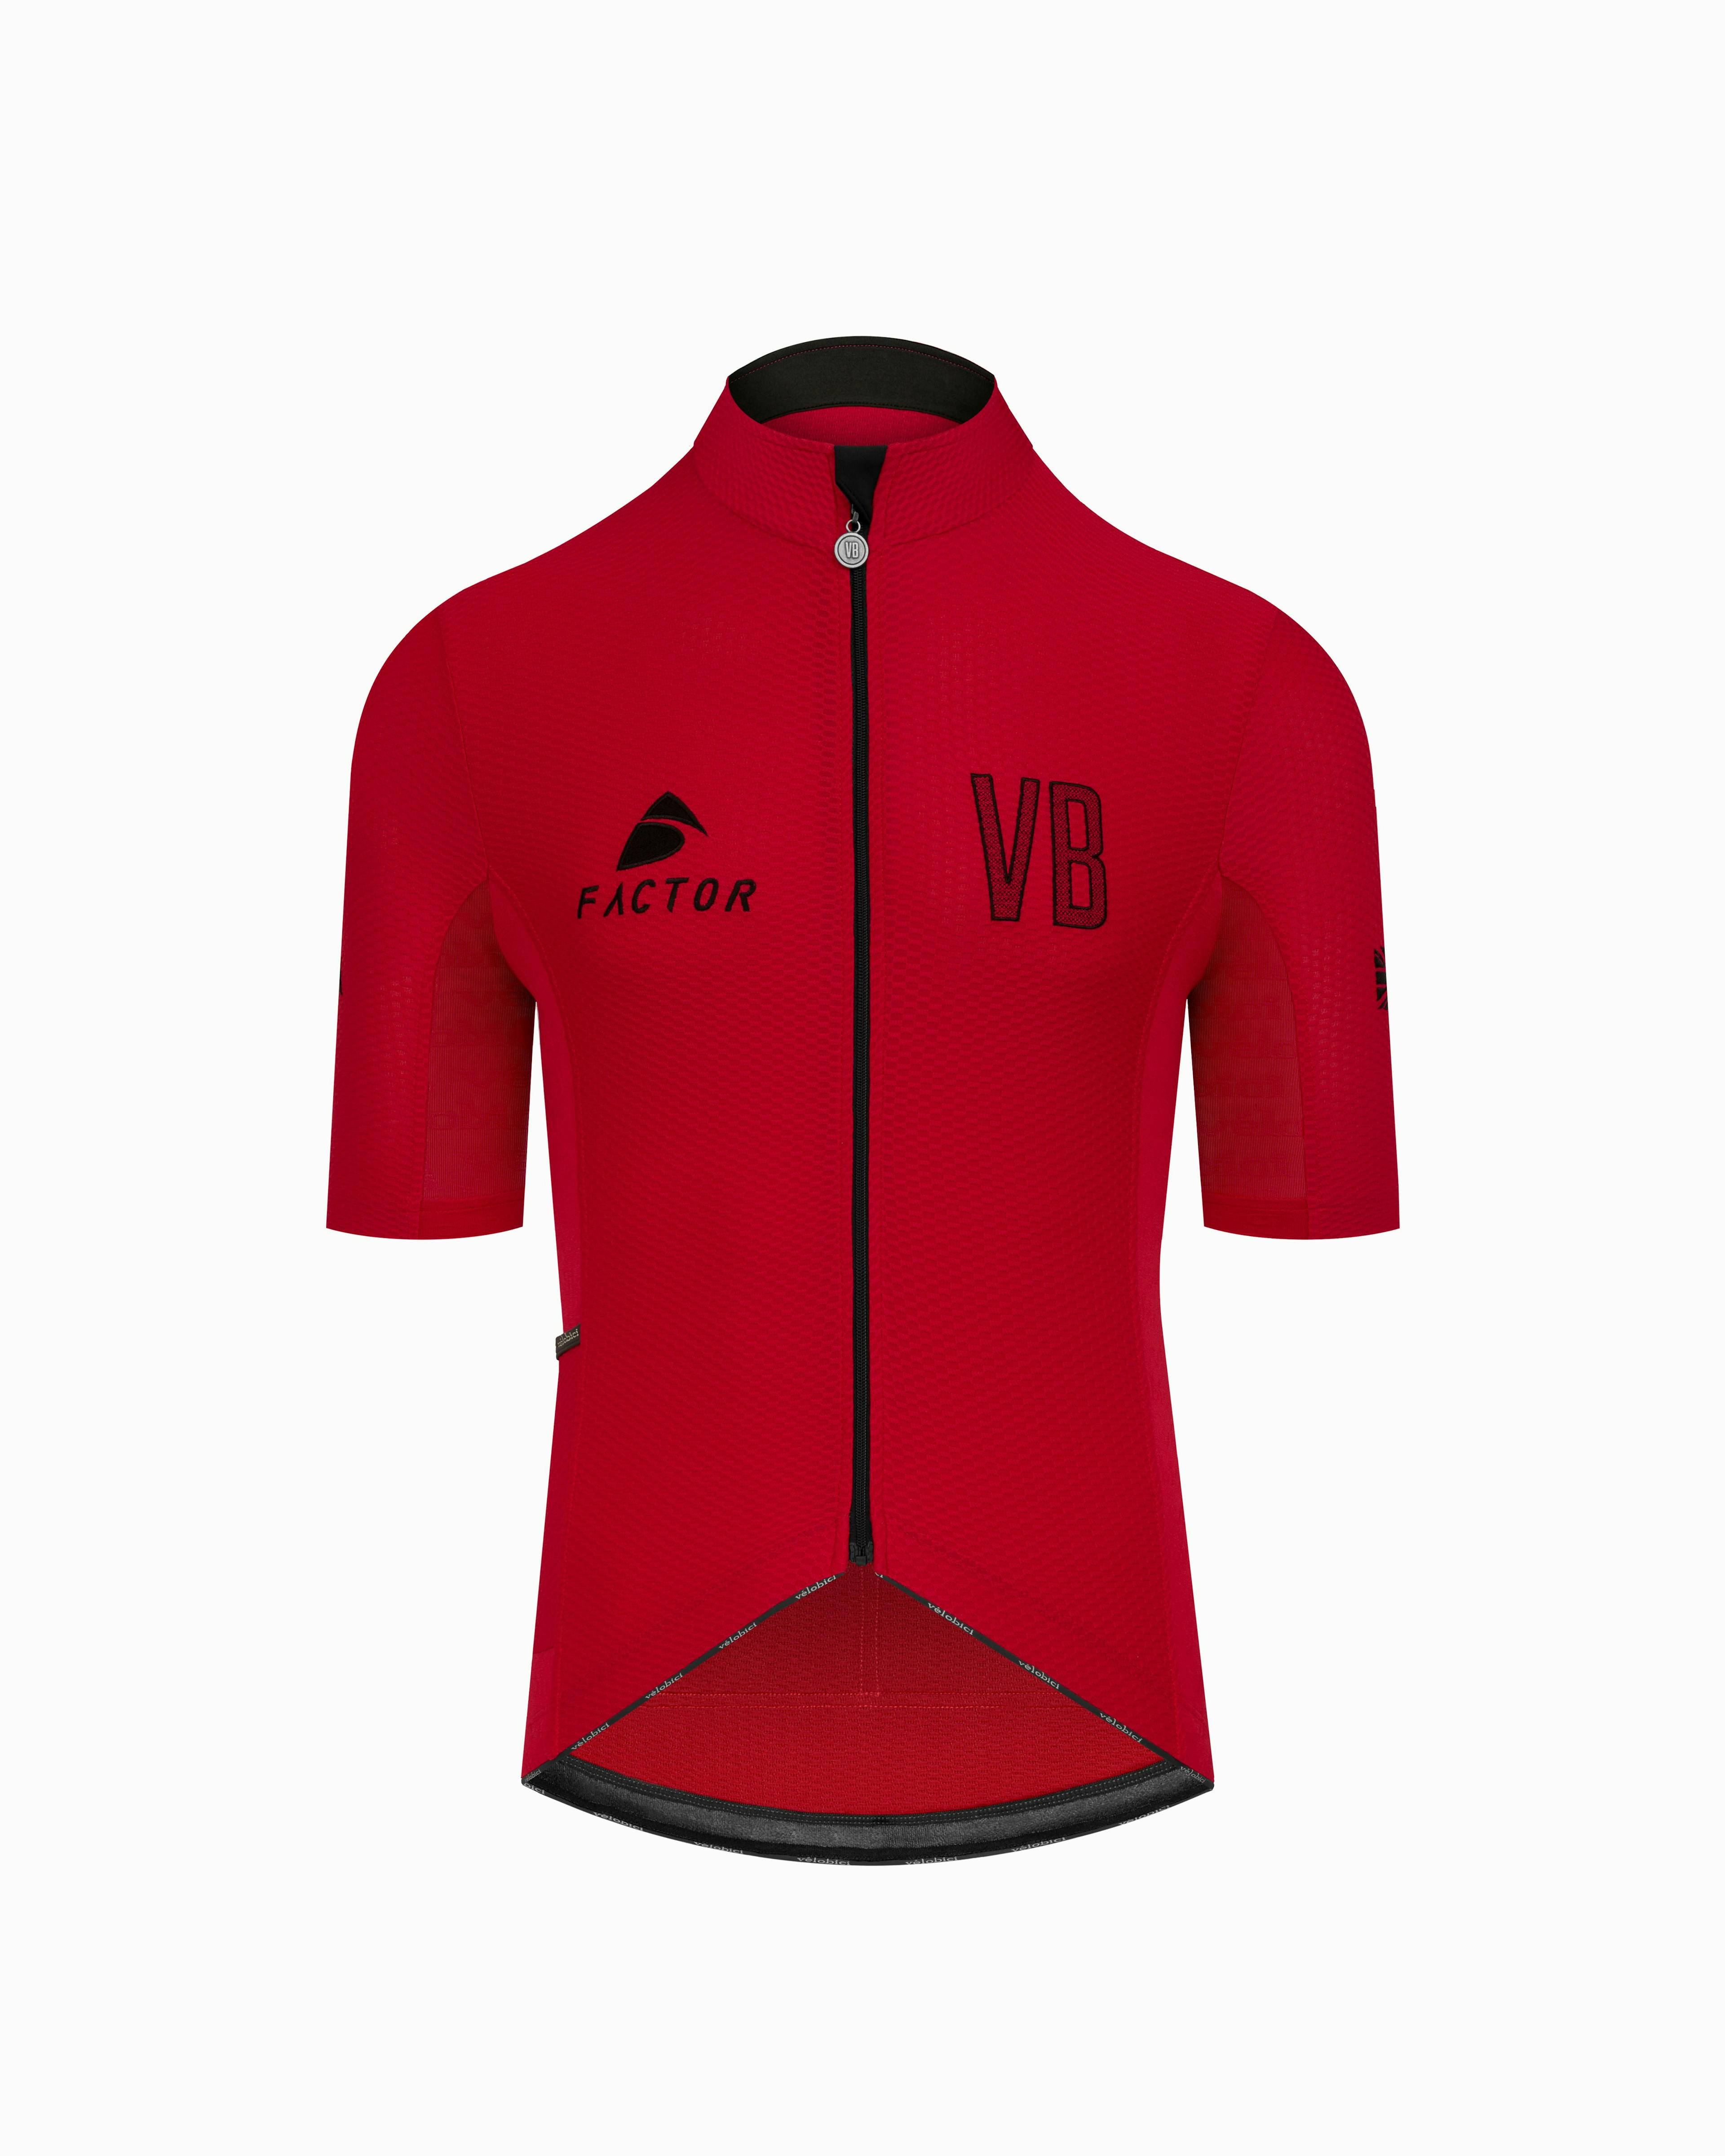 Factor Jersey (Red)